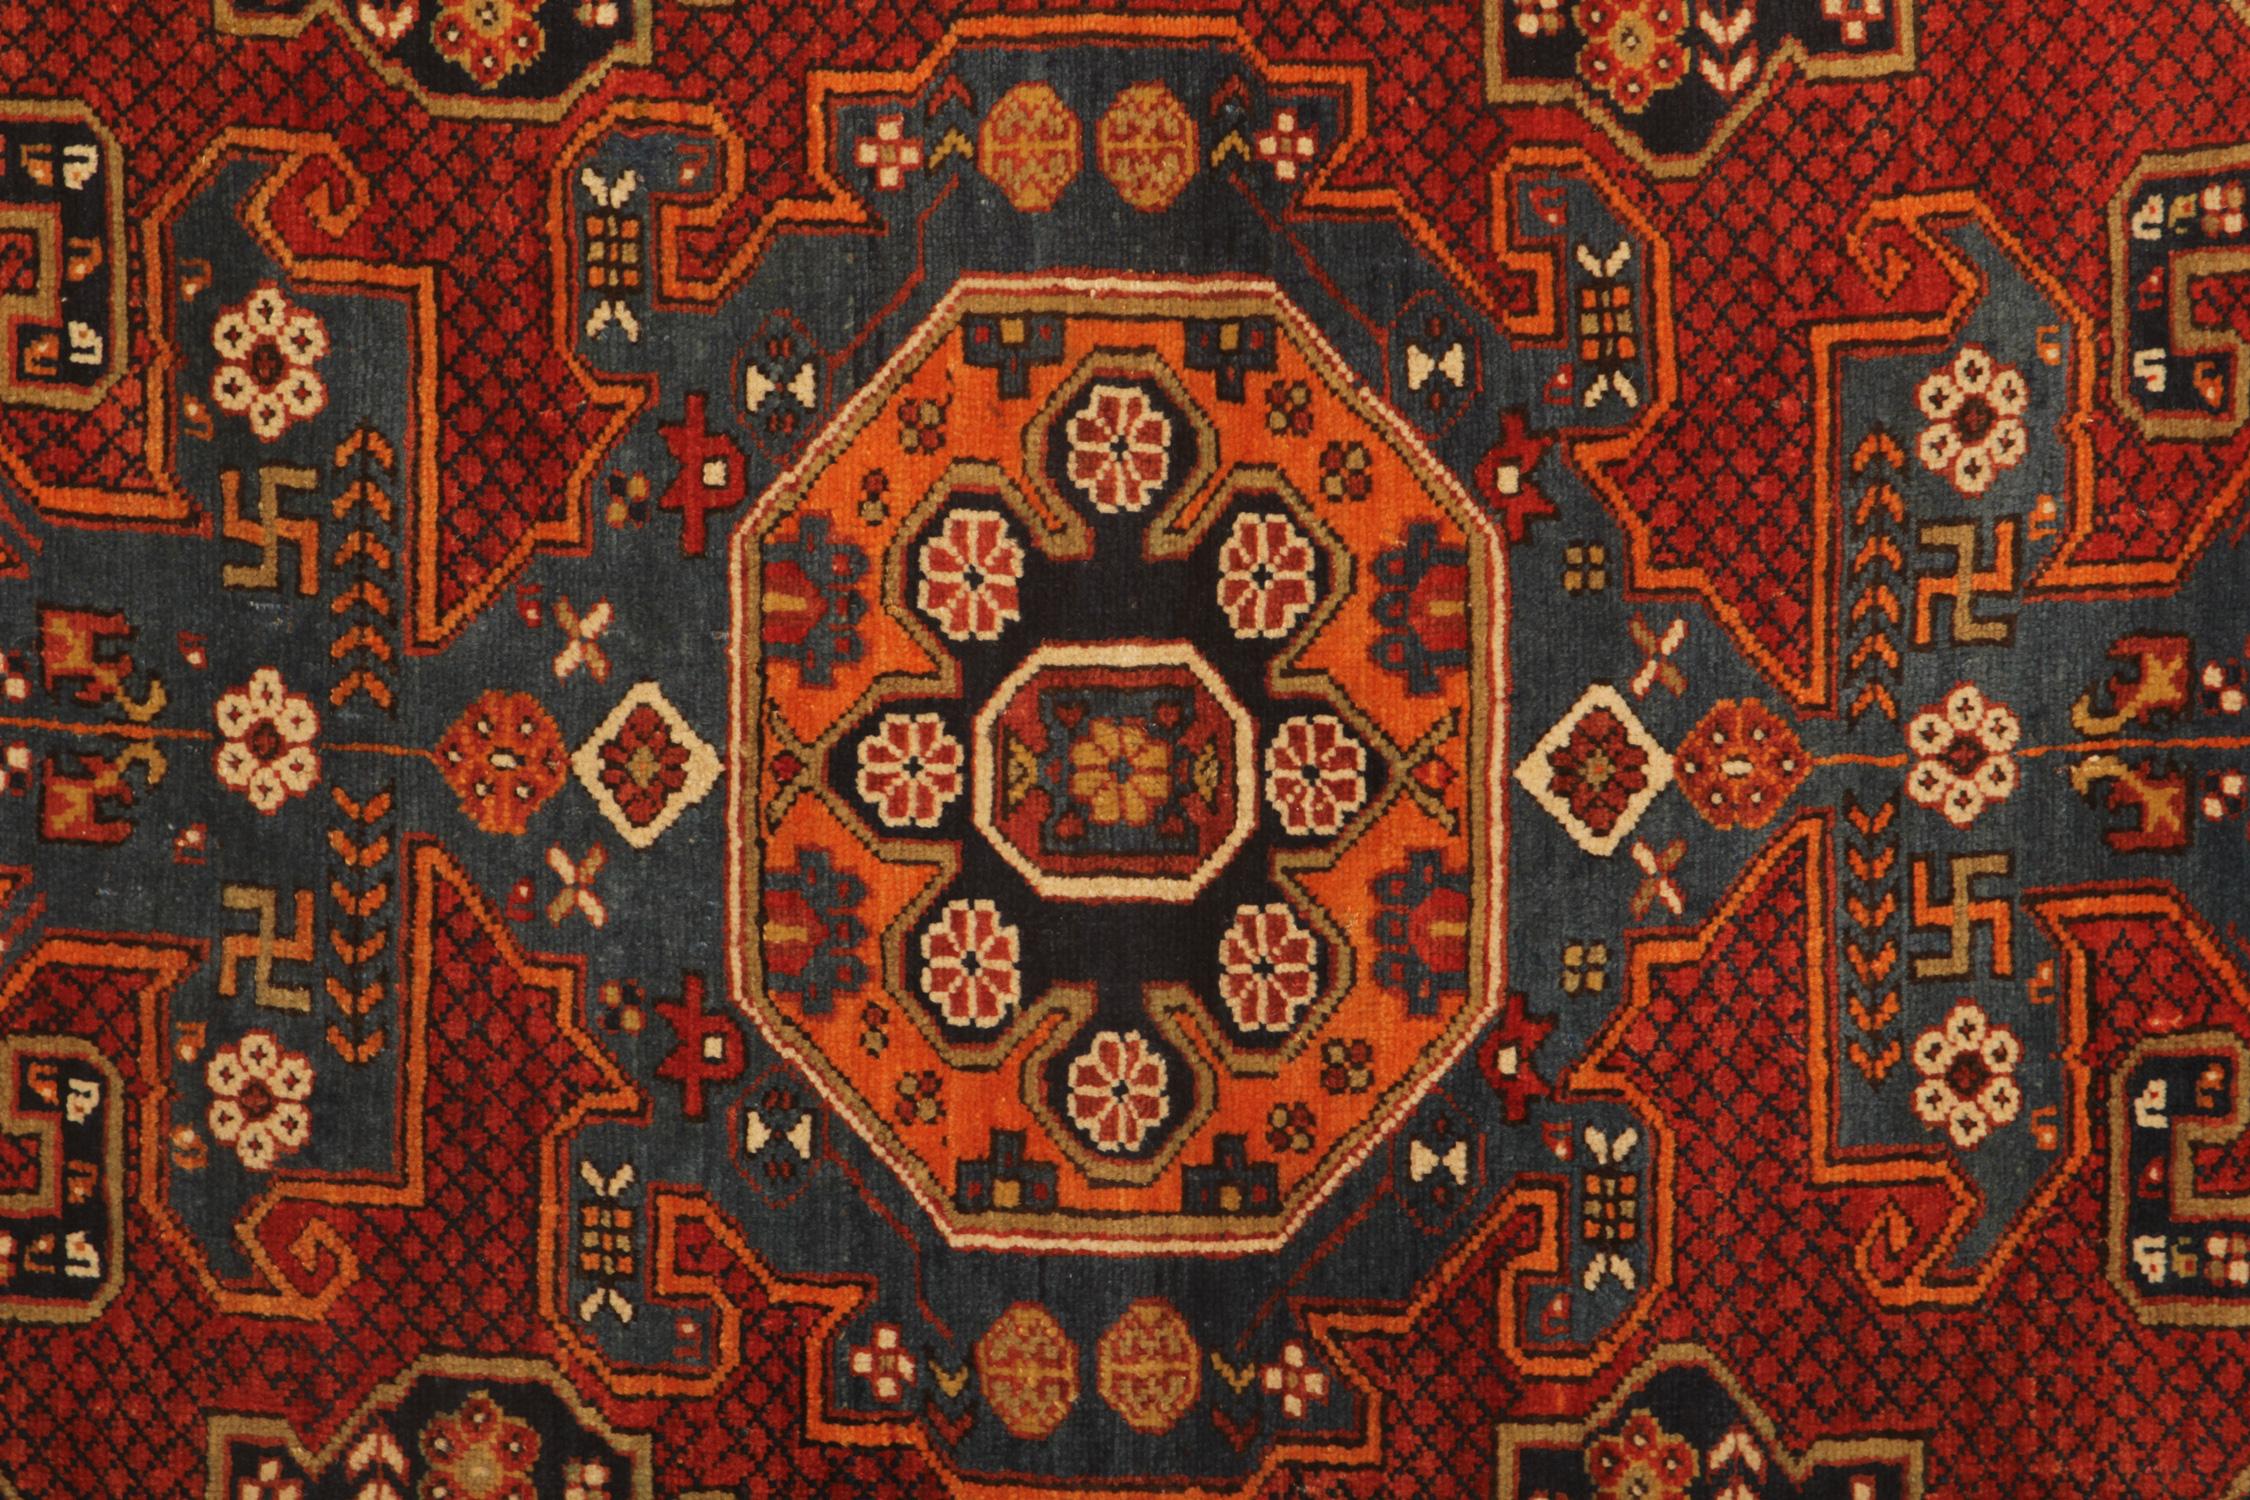 An excellent example of traditional Caucasian carpet rug weaving from the Kazak region. These Medallion design patterned rugs can make a greataccessory for your home interior. They add a cozy warm feeling to any environment because of the great